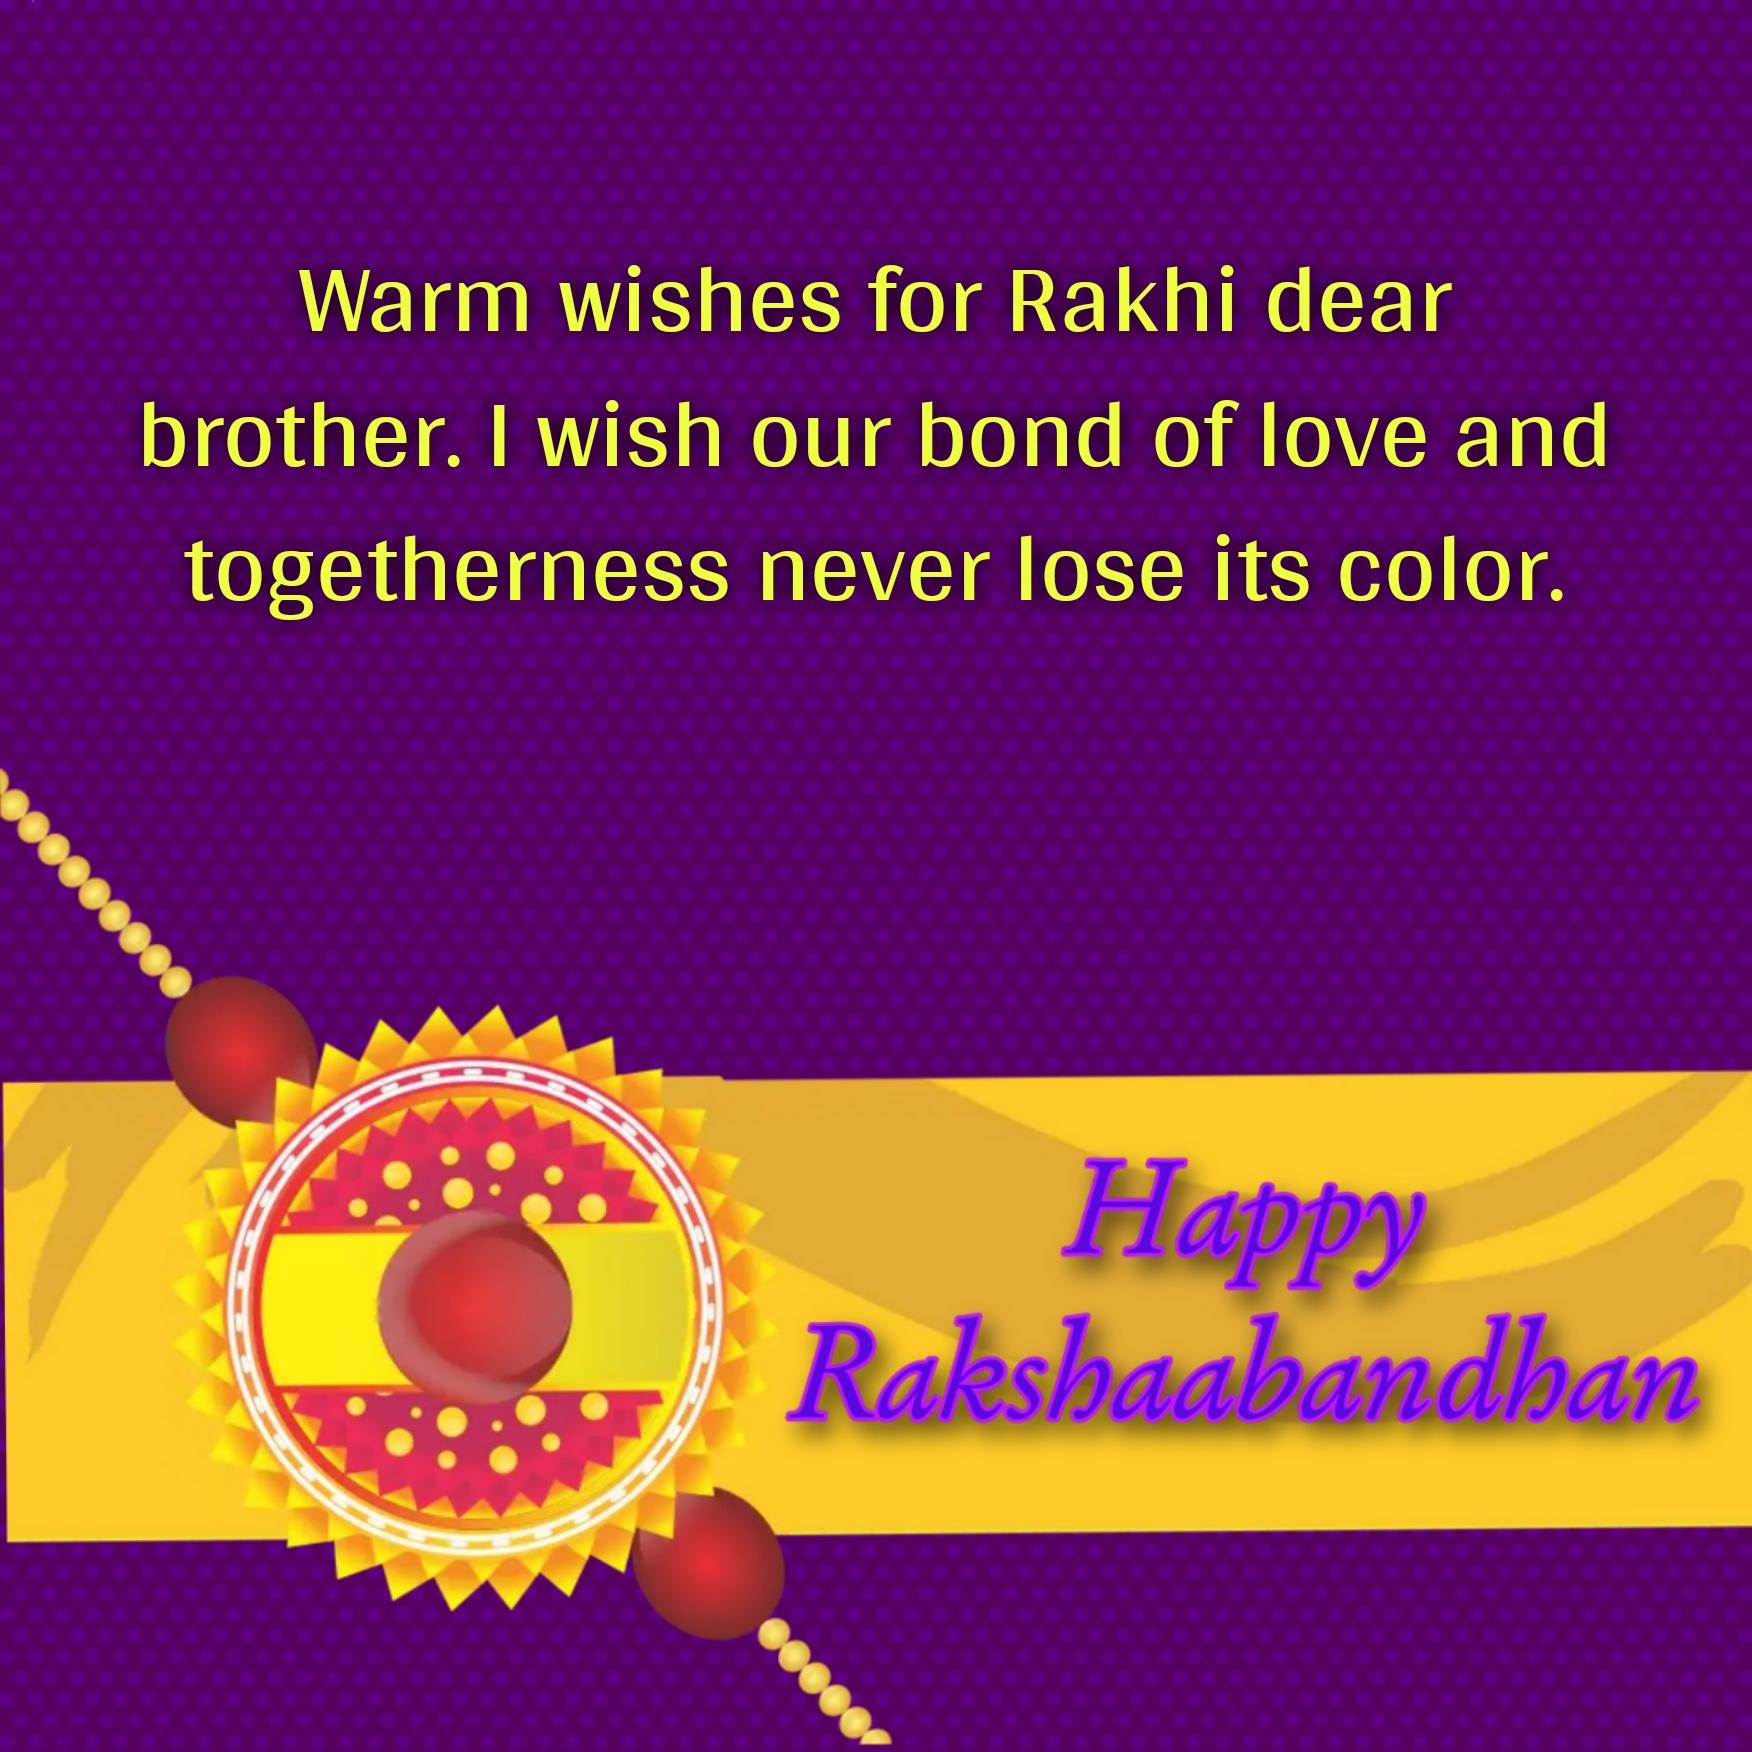 Warm wishes for Rakhi dear brother I wish our bond of love